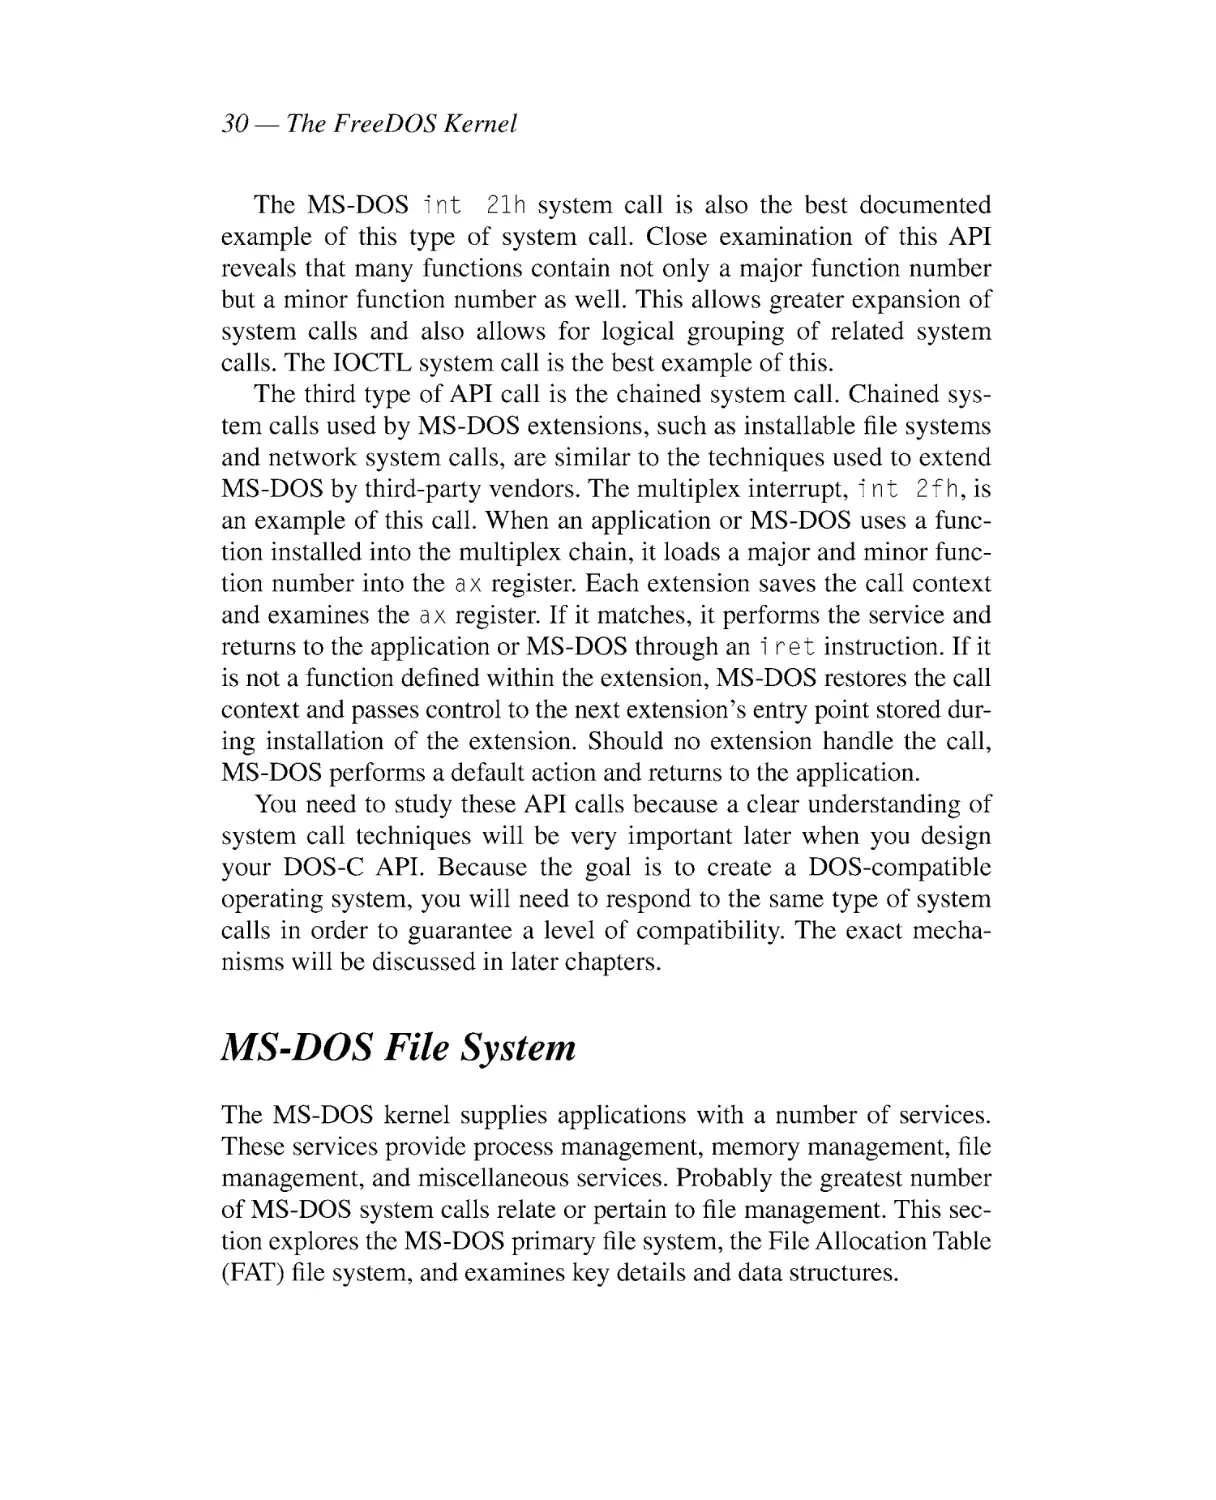 MS-DOS File System